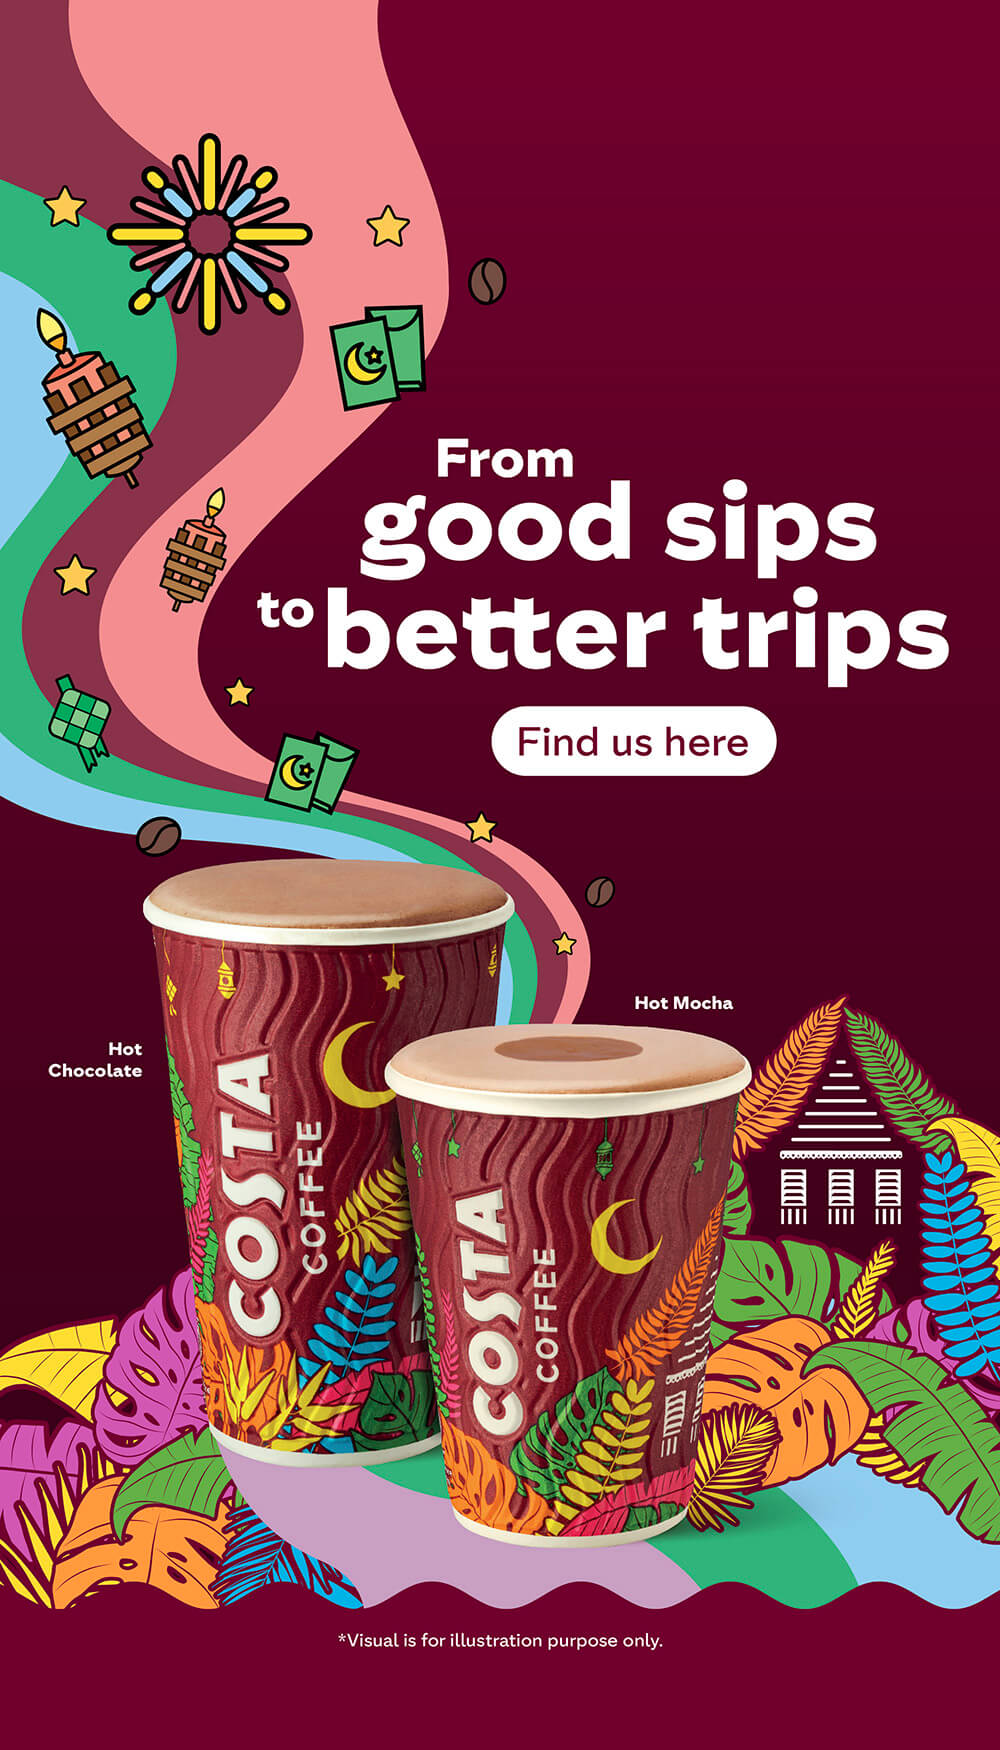 From good sips to better trips